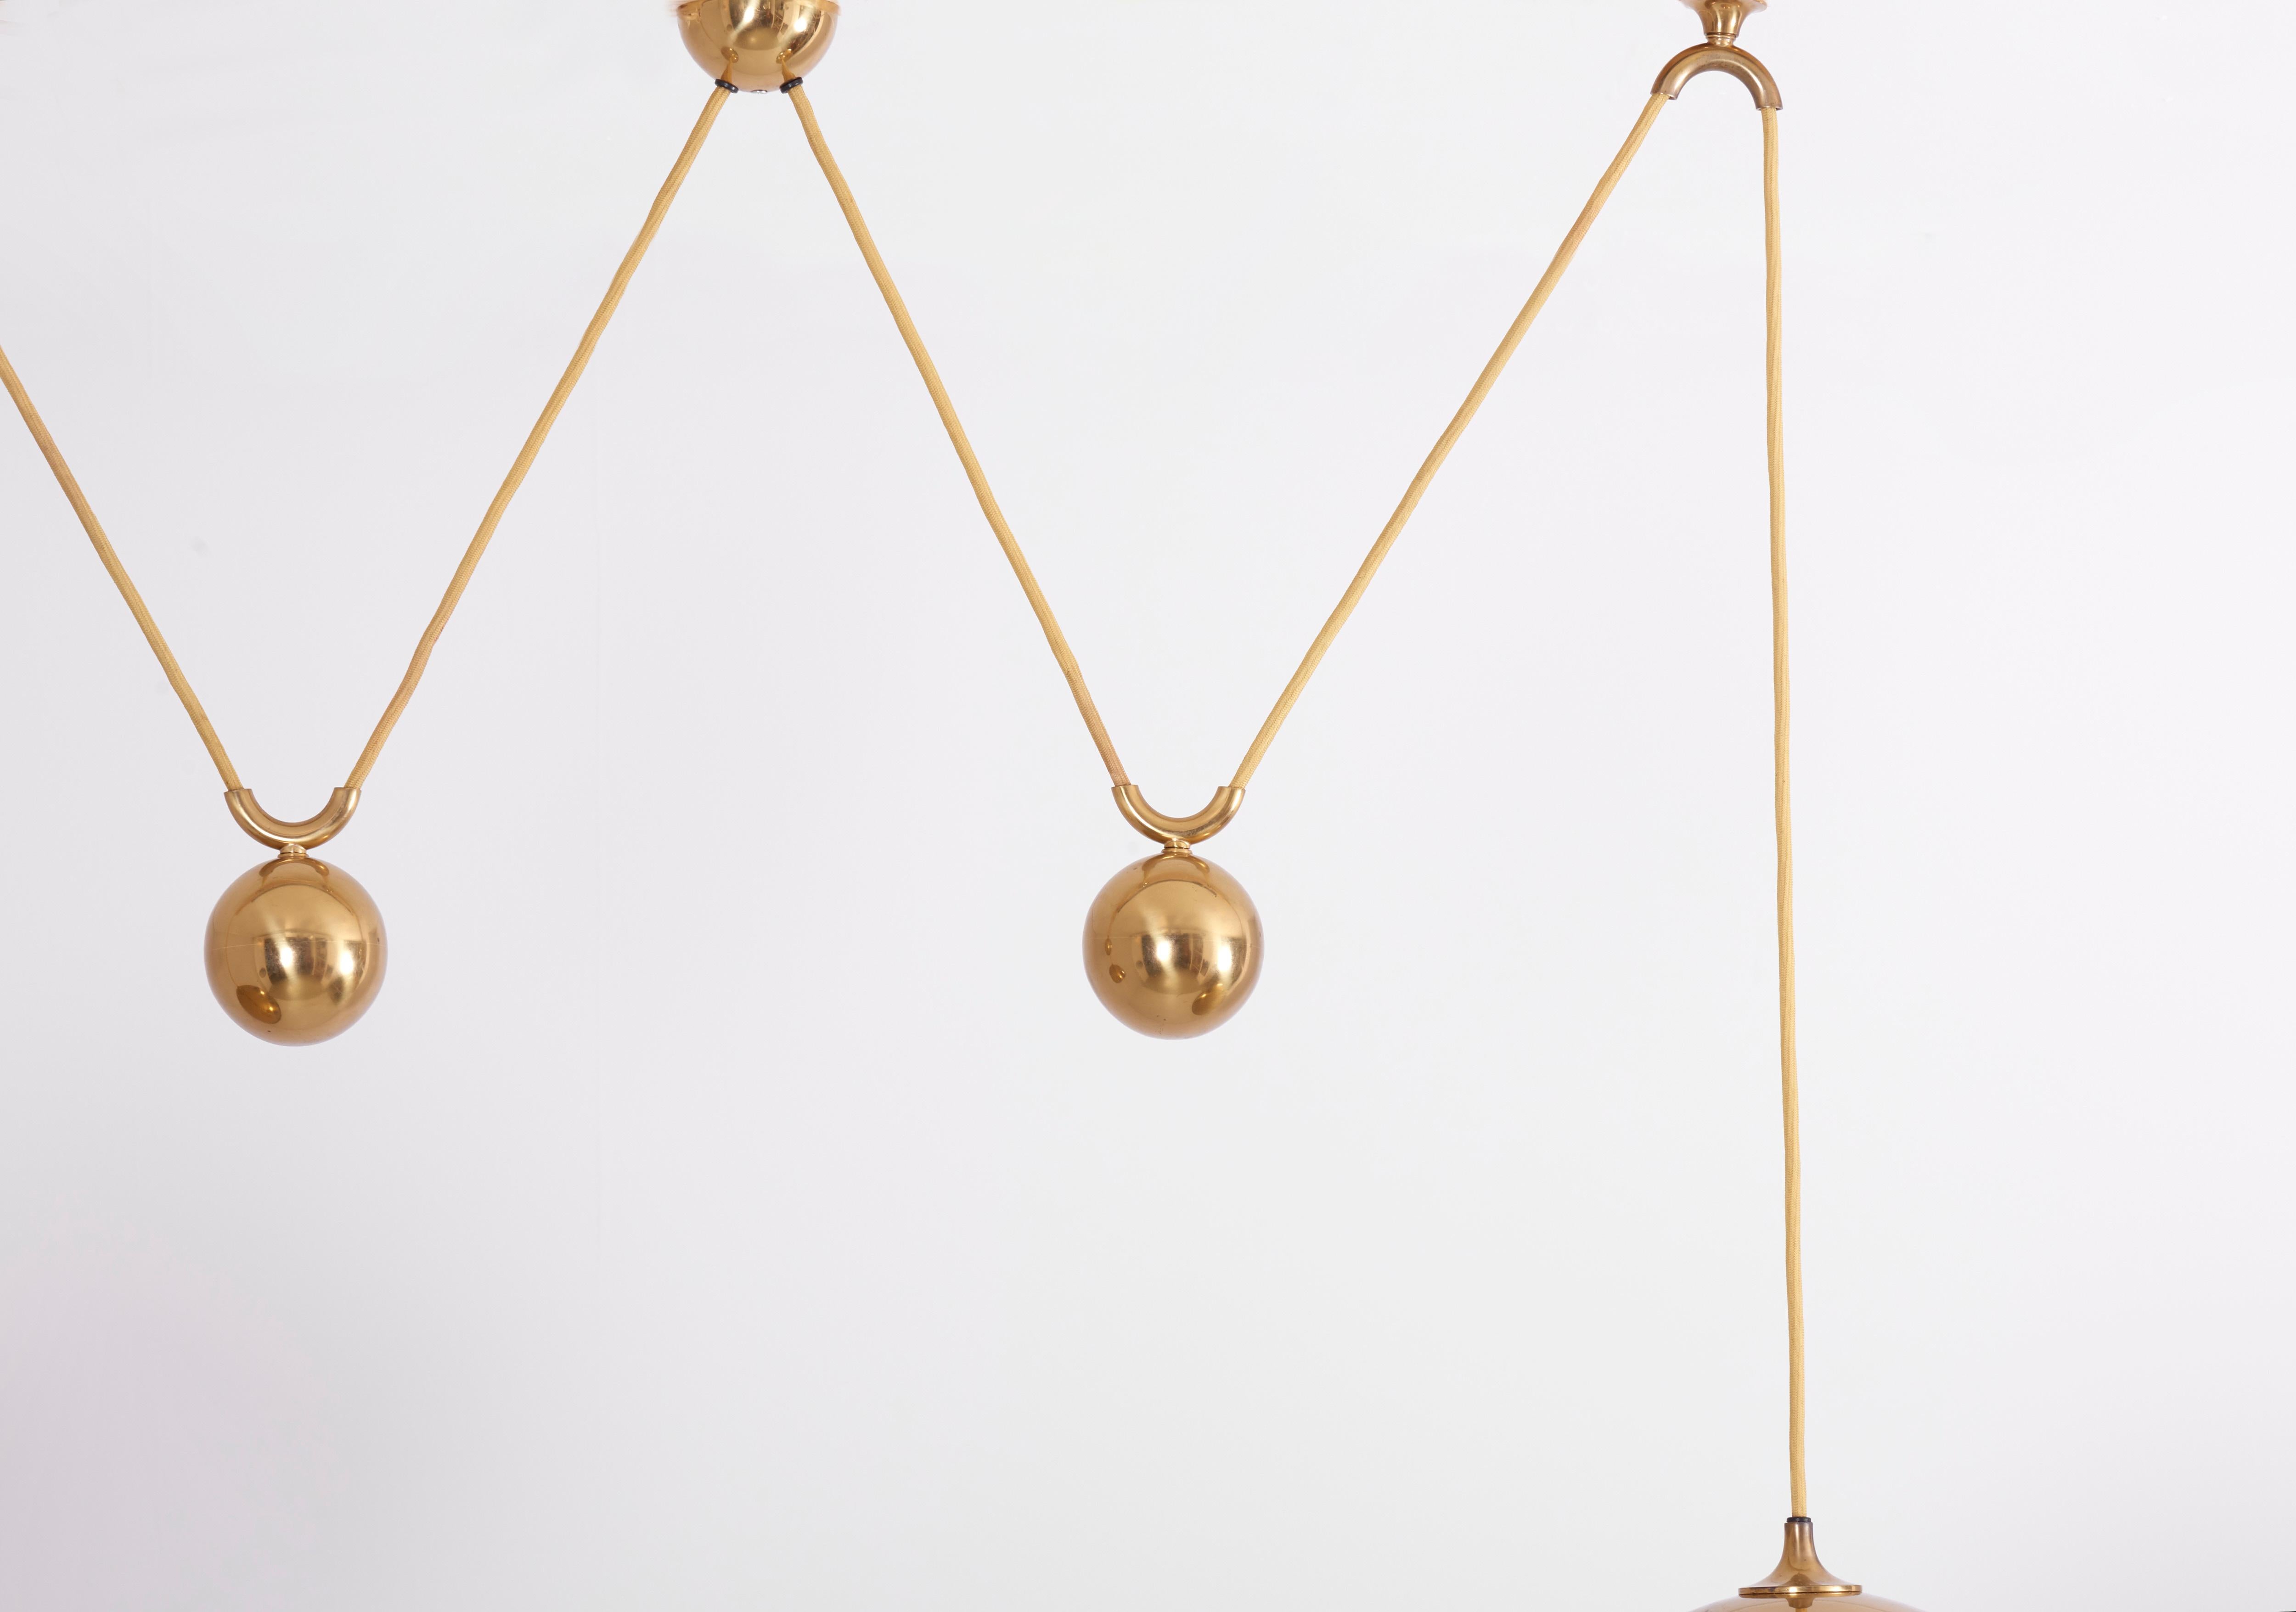 German Double Posa Pendant Lamp with Side Counter Weights by Florian Schulz, 1970s